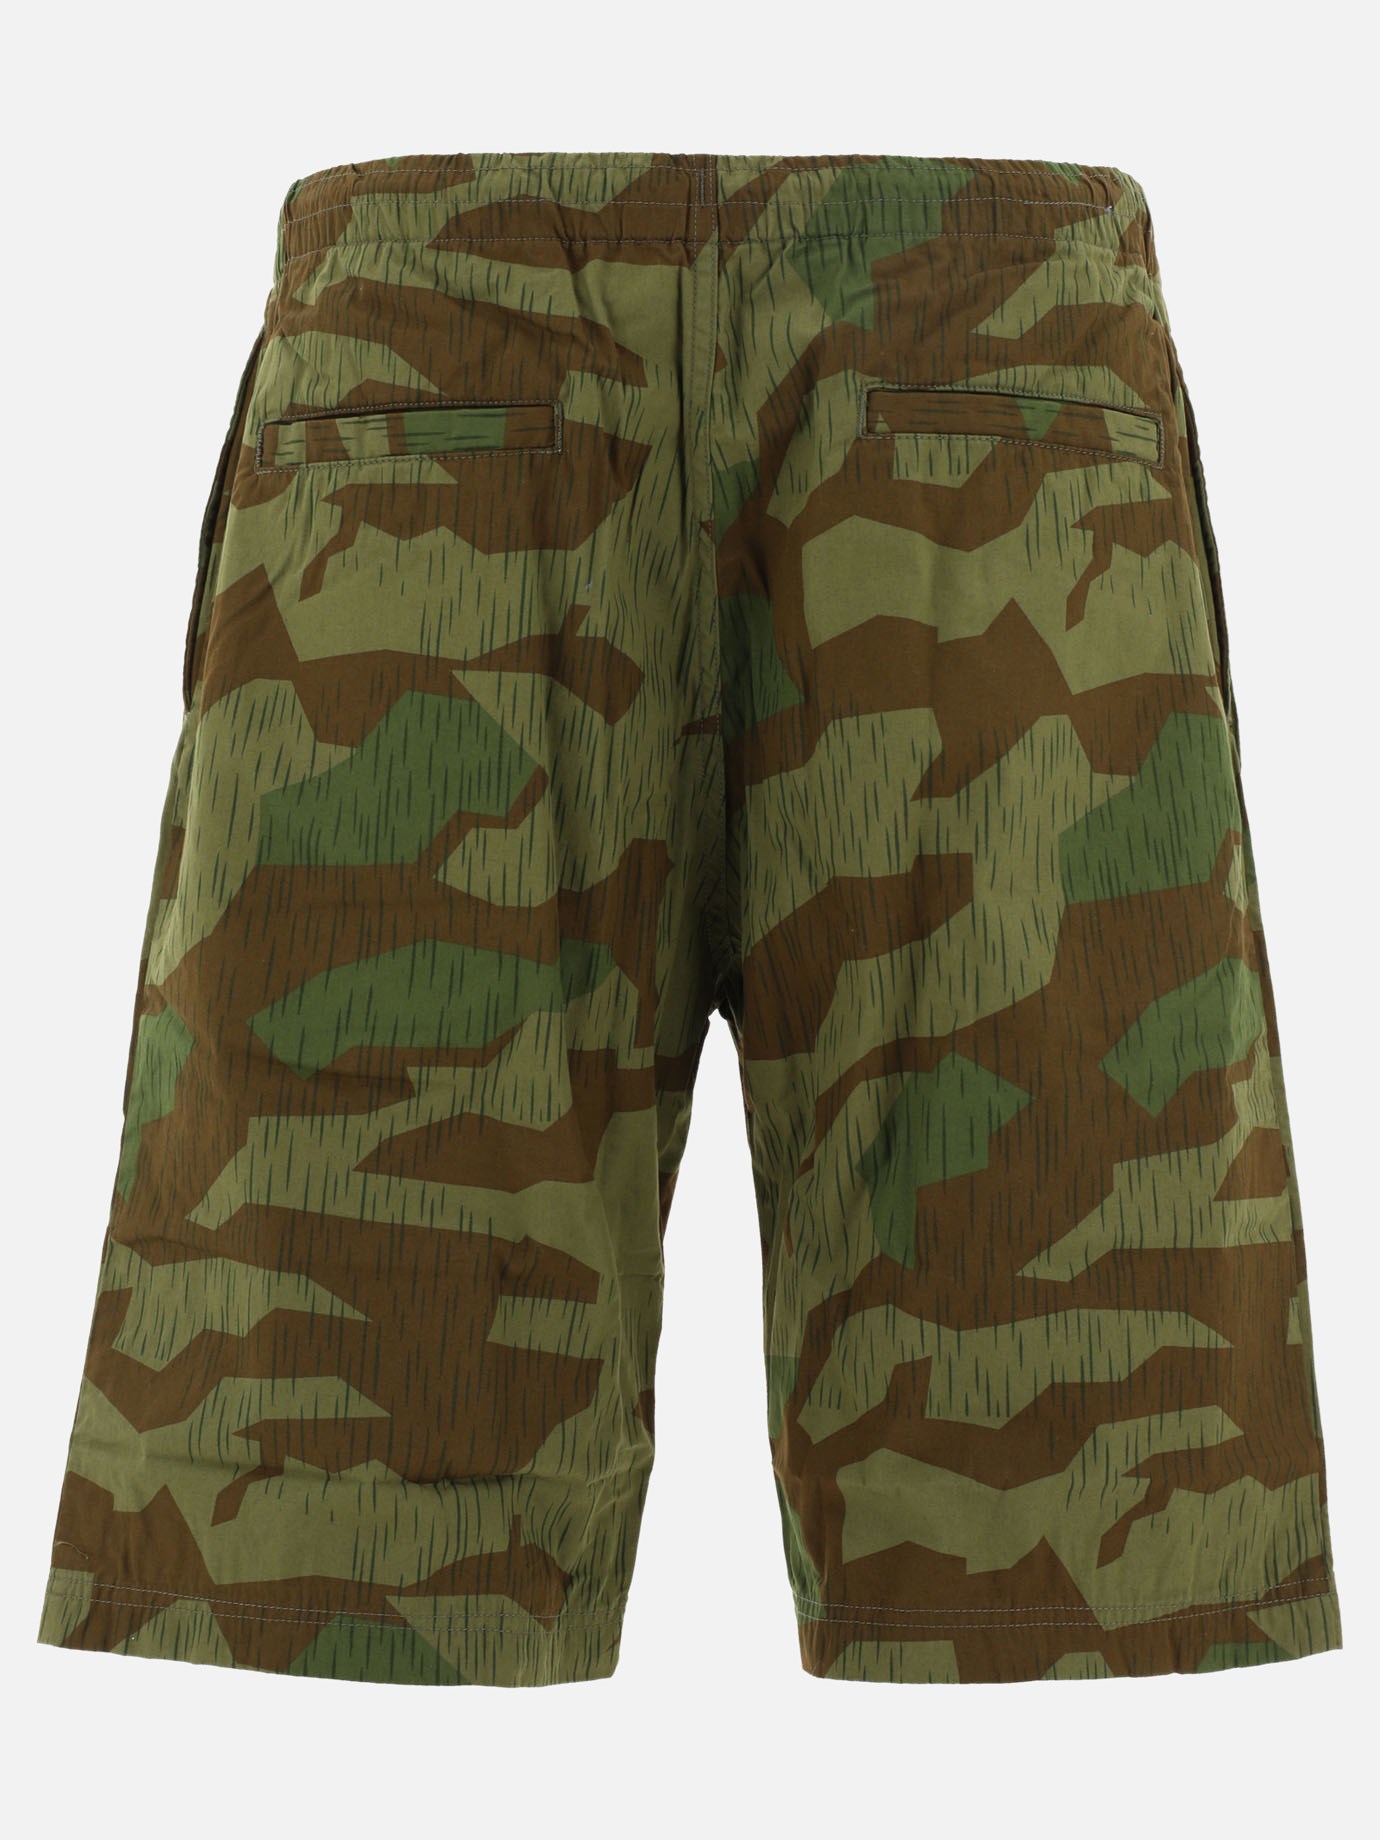 Short  Easy Shorts  by Mountain Research